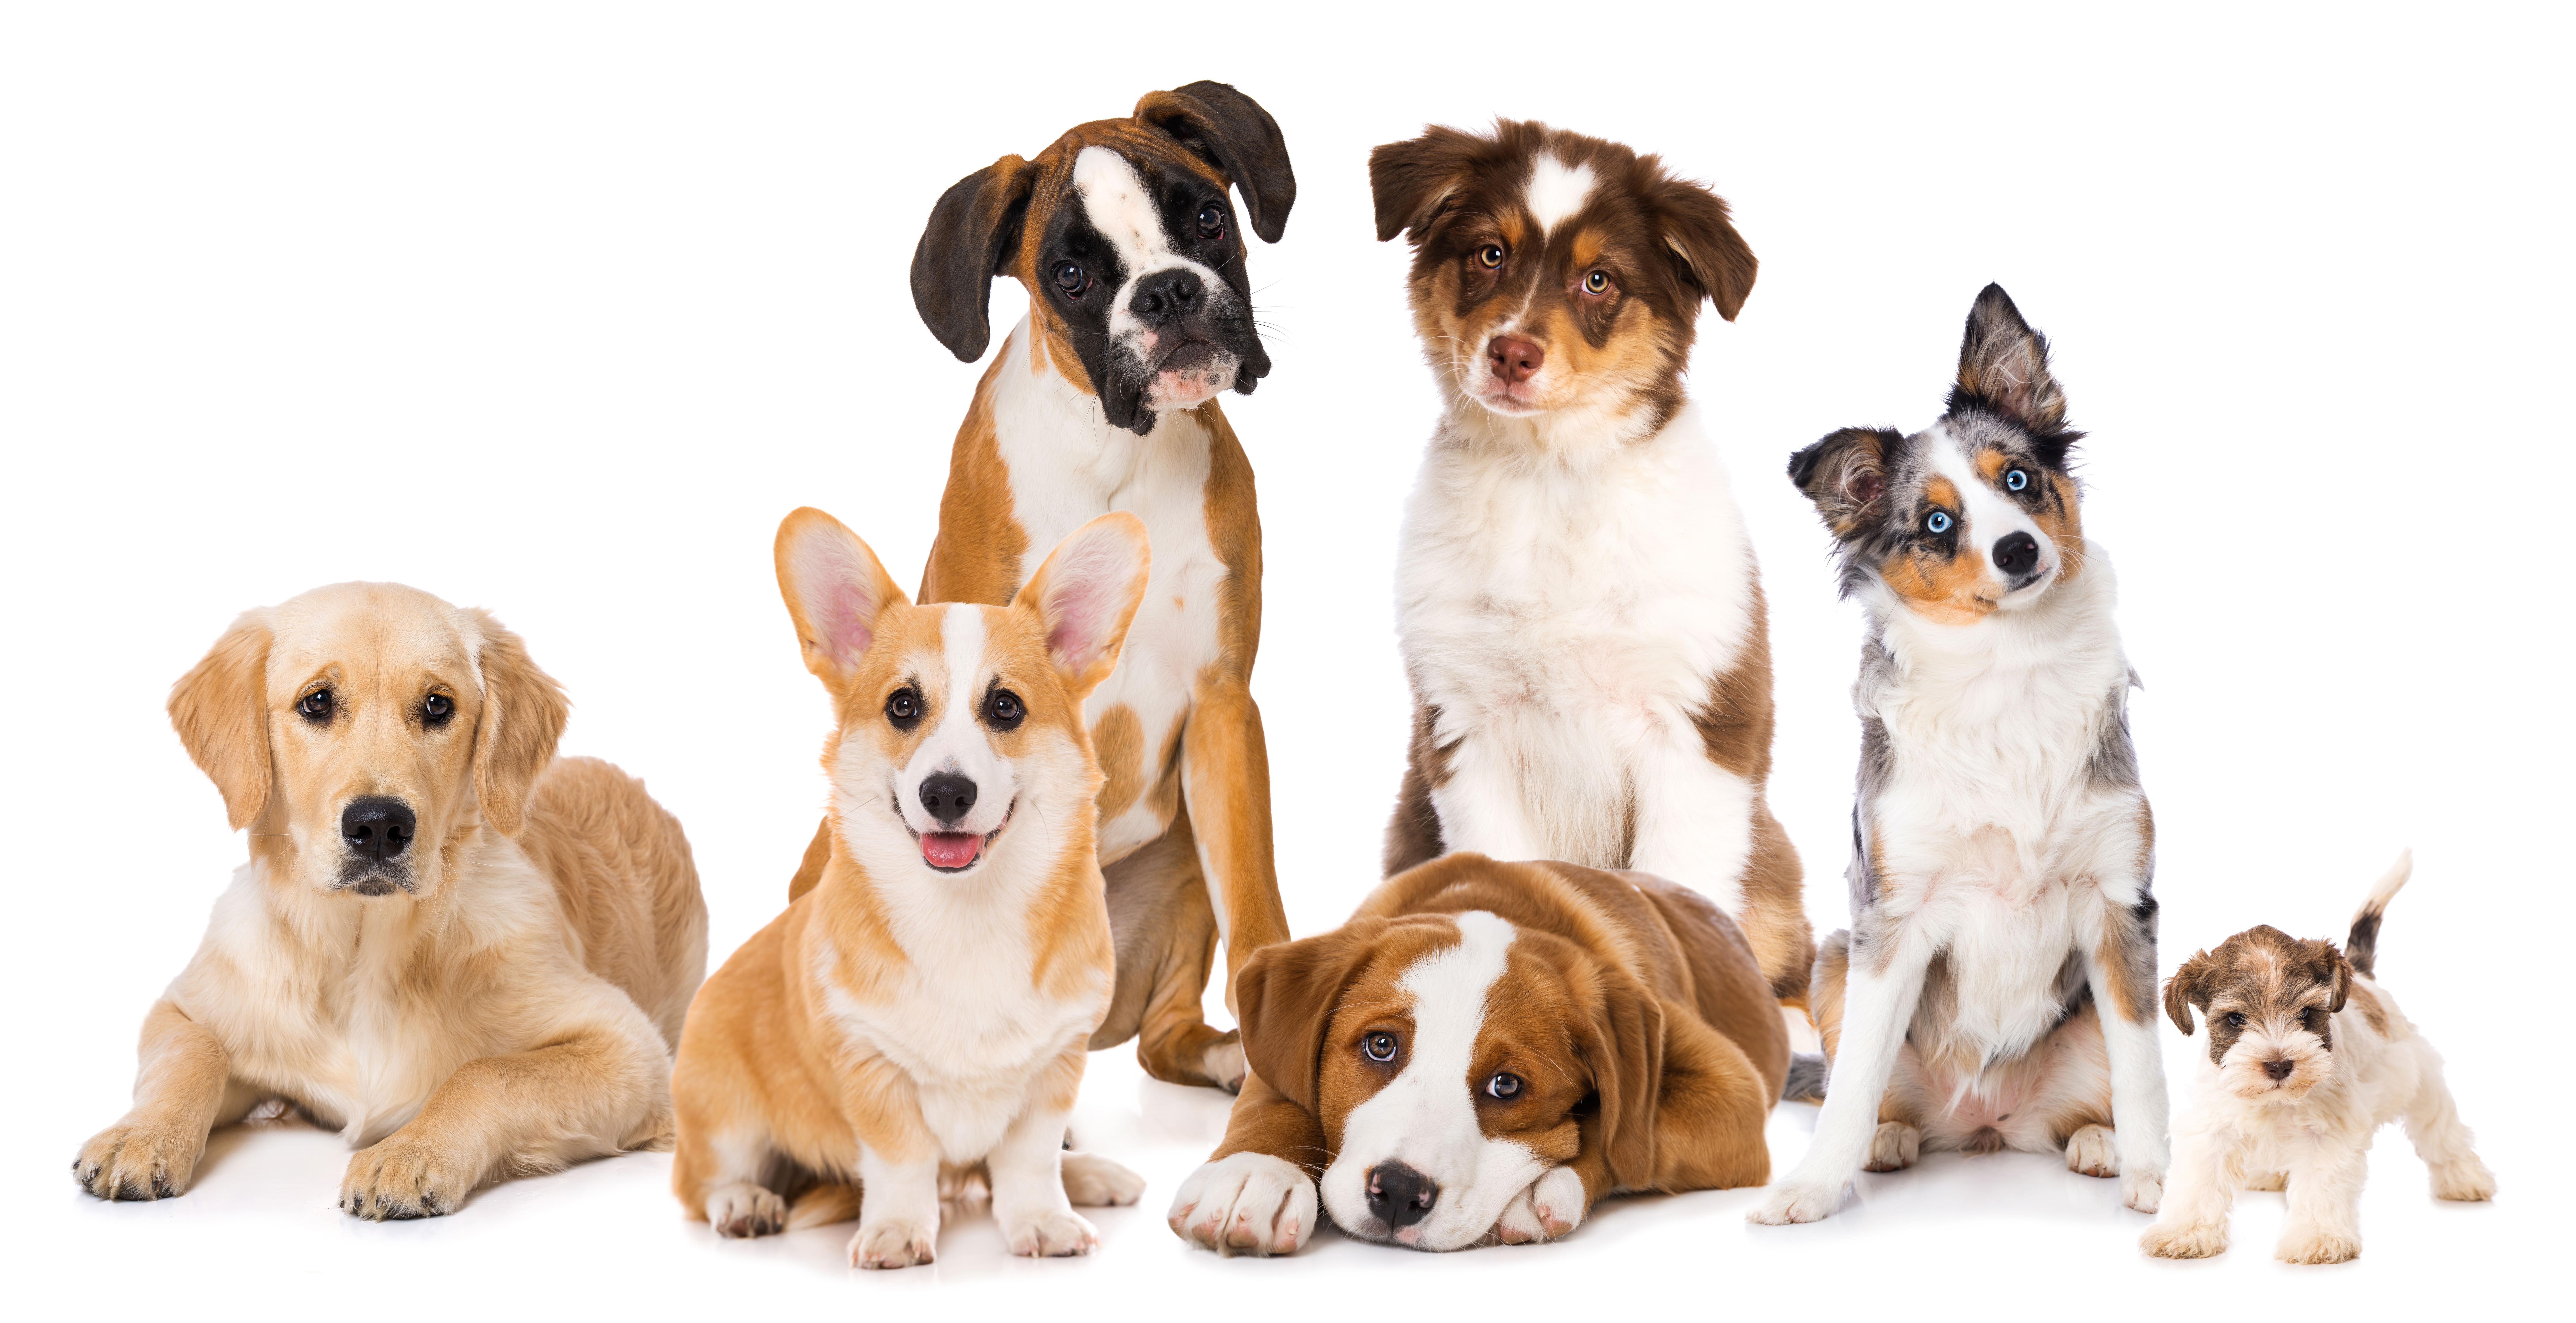 Discover what type of dog breed you are based on this quiz